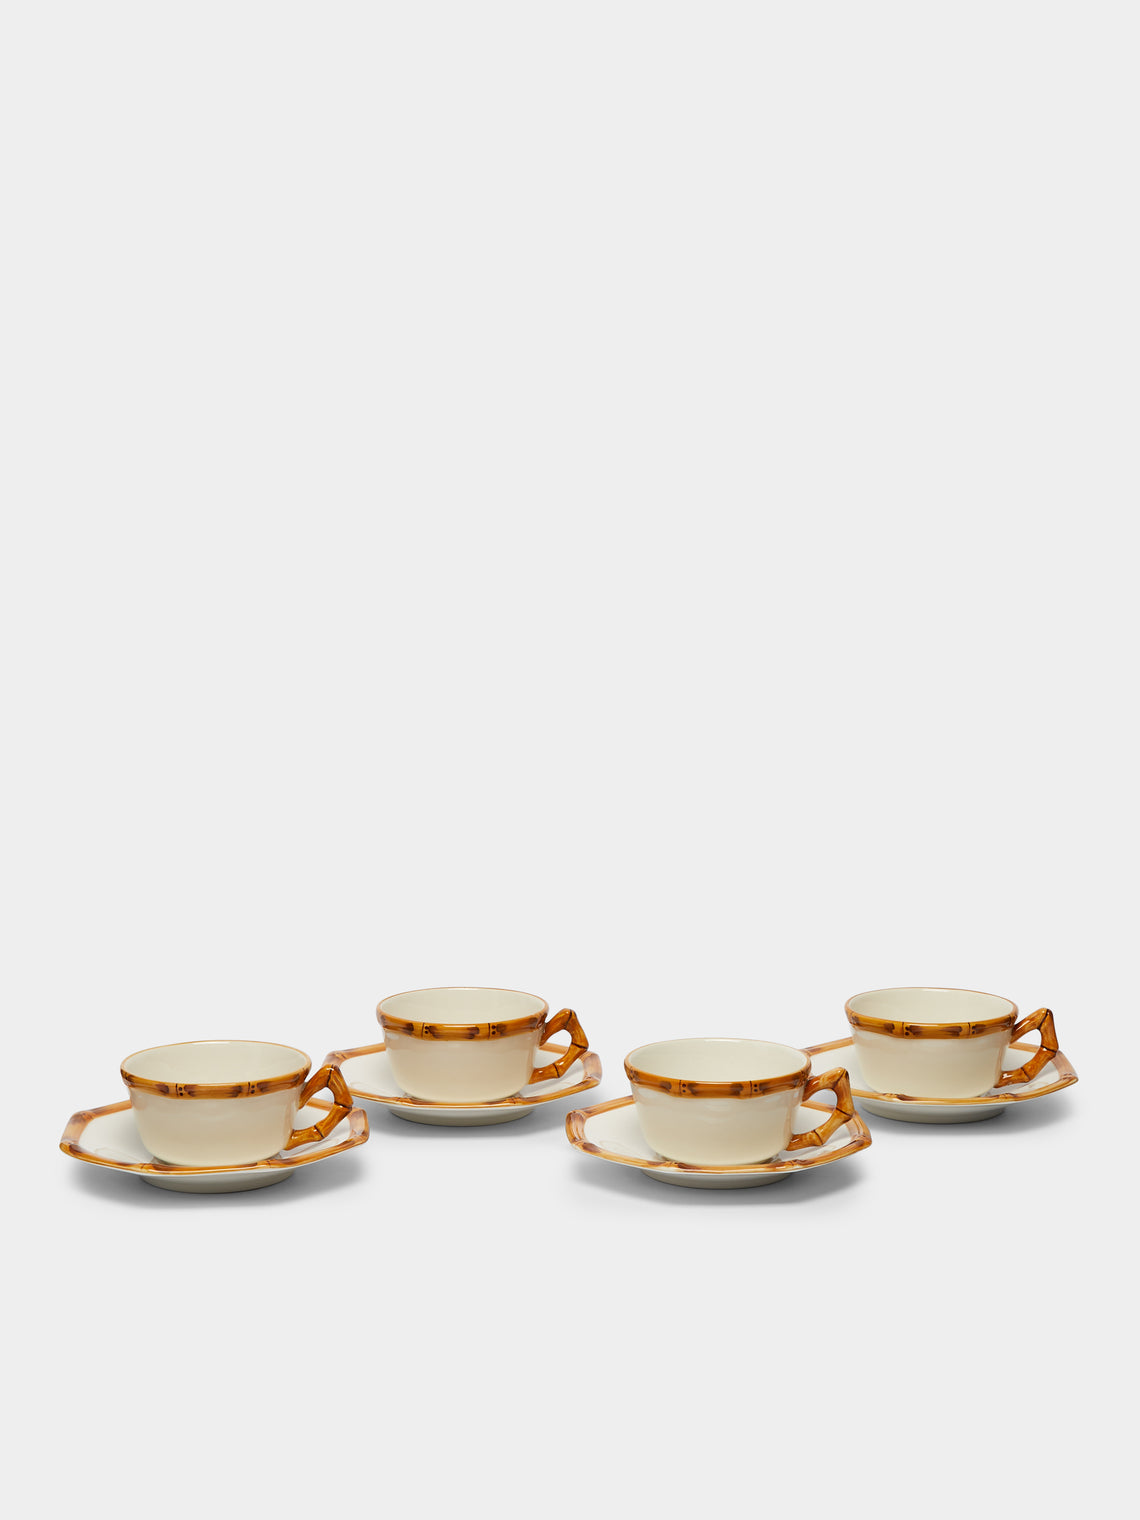 Este Ceramiche - Bamboo Hand-Painted Ceramic Teacups and Saucers (Set of 4) -  - ABASK